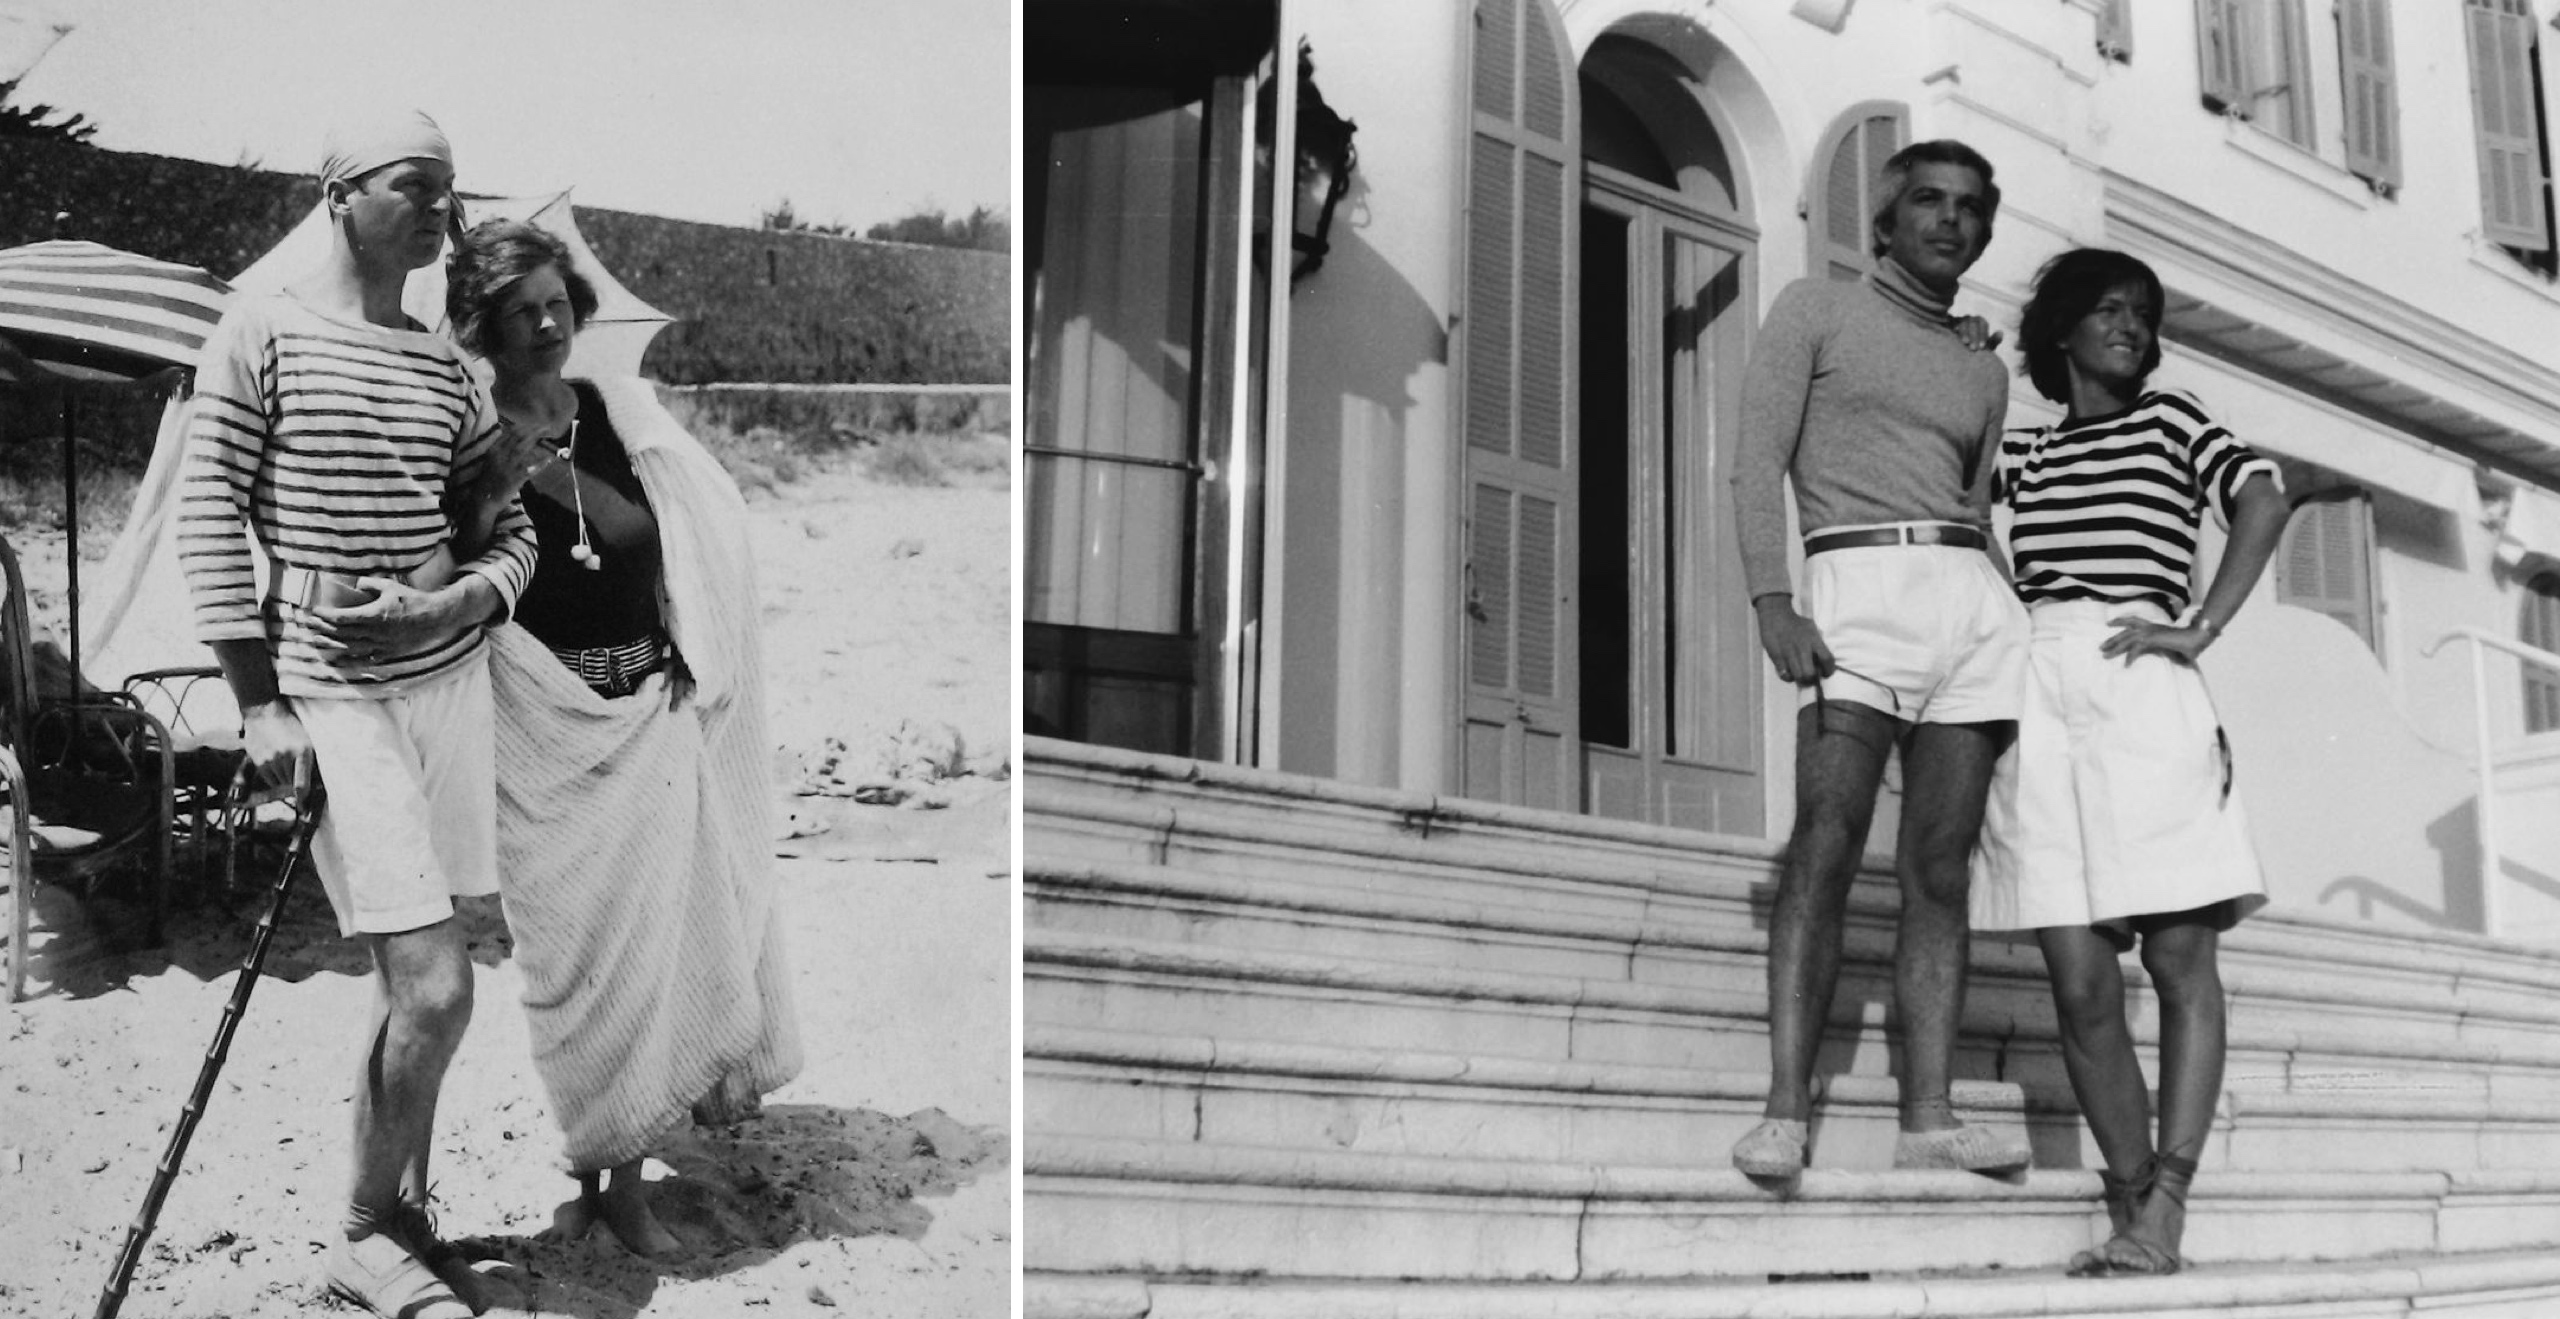 Gerald and Sara Murphy at Cap d’Antibes beach, 1923; Ralph Lauren and Buffy Birrittella channeling Sara and Gerald on the steps of the Hotel du Cap-Eden-Roc in 1977